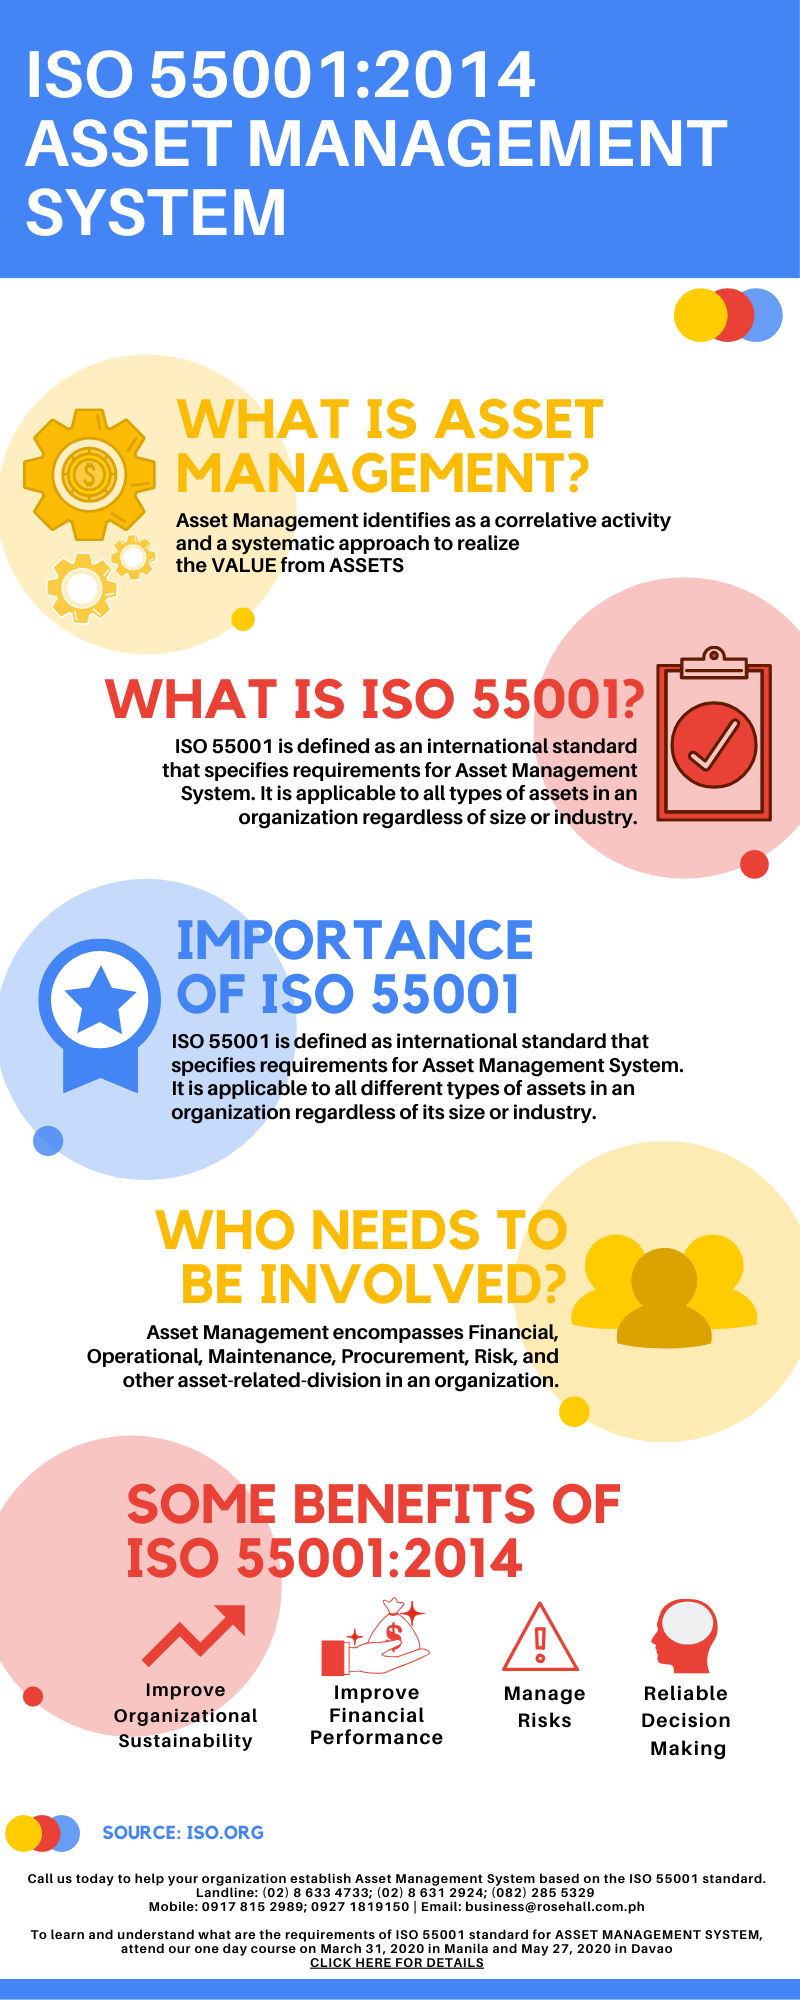 ISO 55001 ASSET MANAGEMENT SYSTEM - ROSEHALL Management Consultants, Inc.